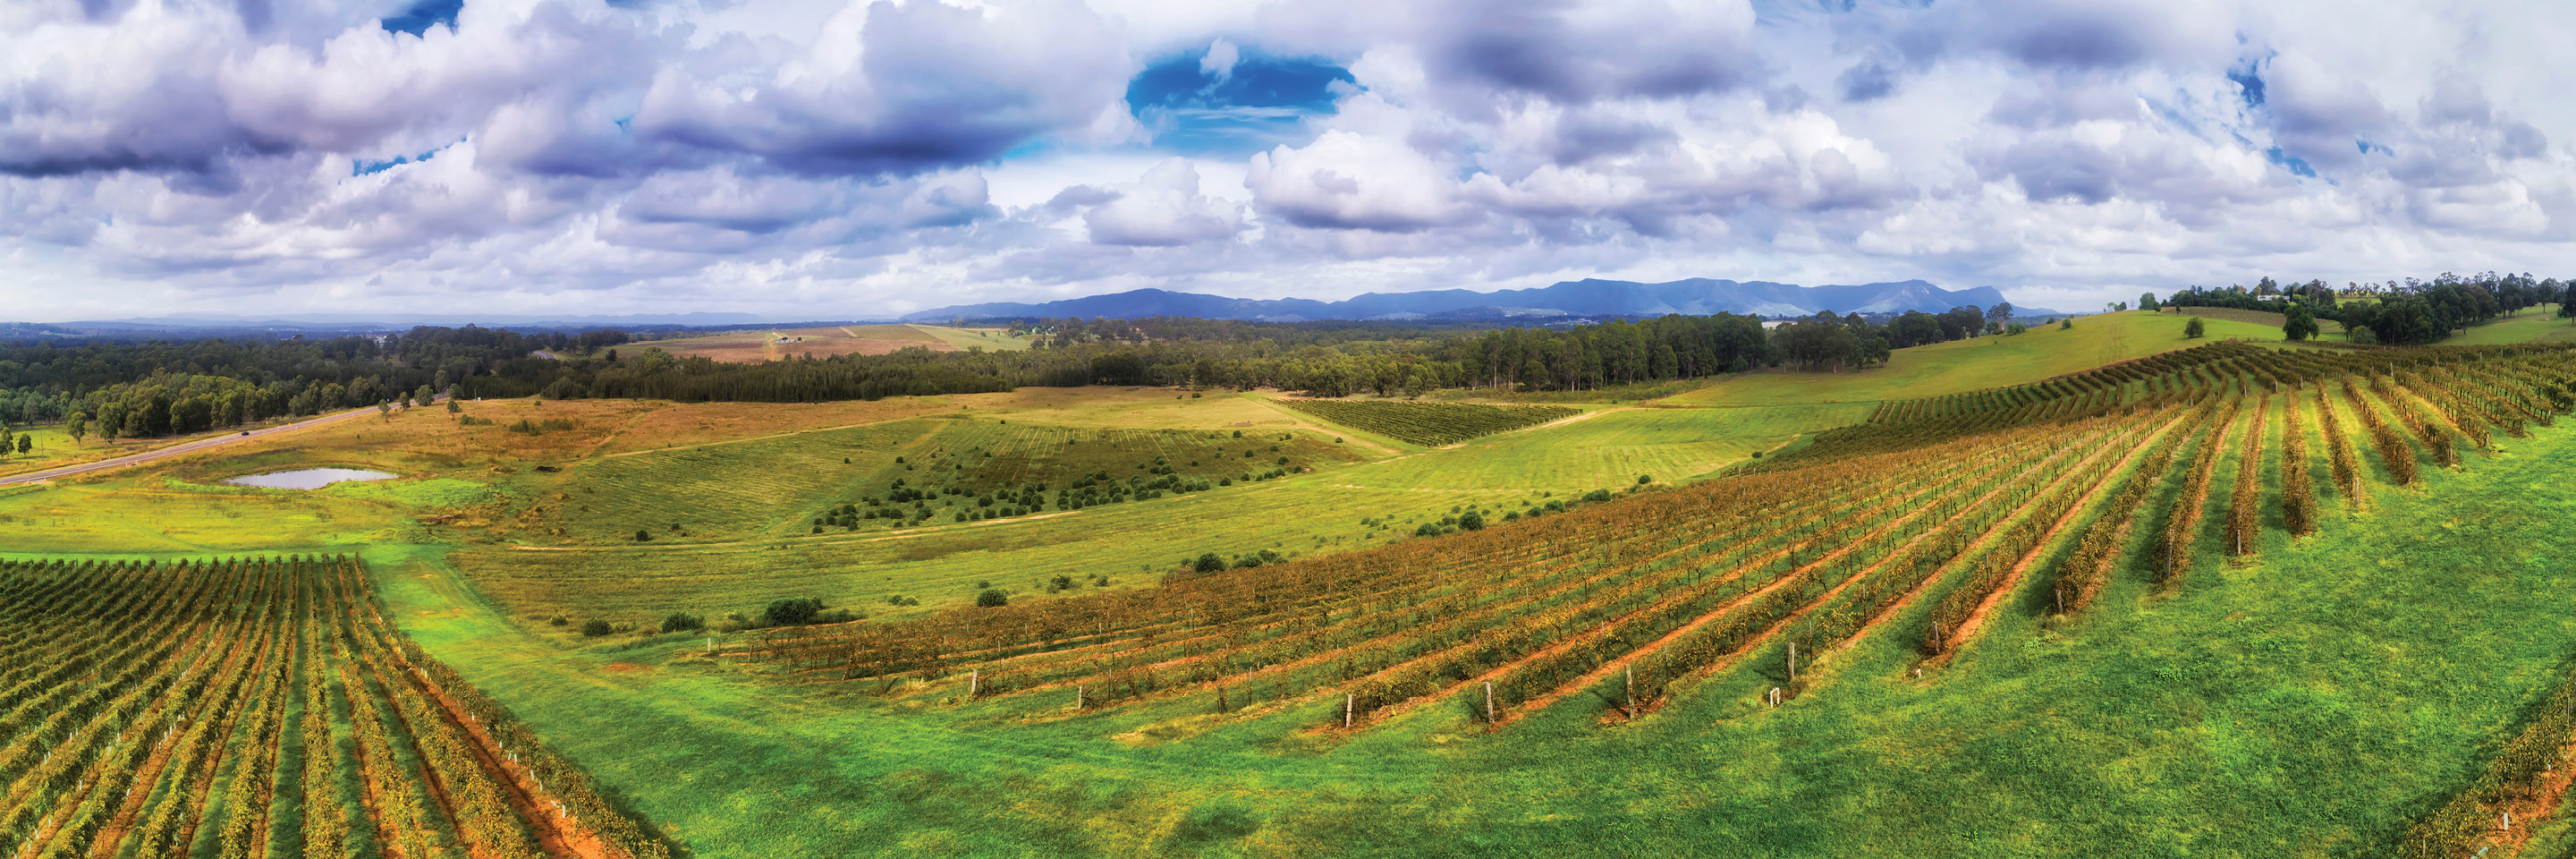 New South Wales Wineries & Countryside 